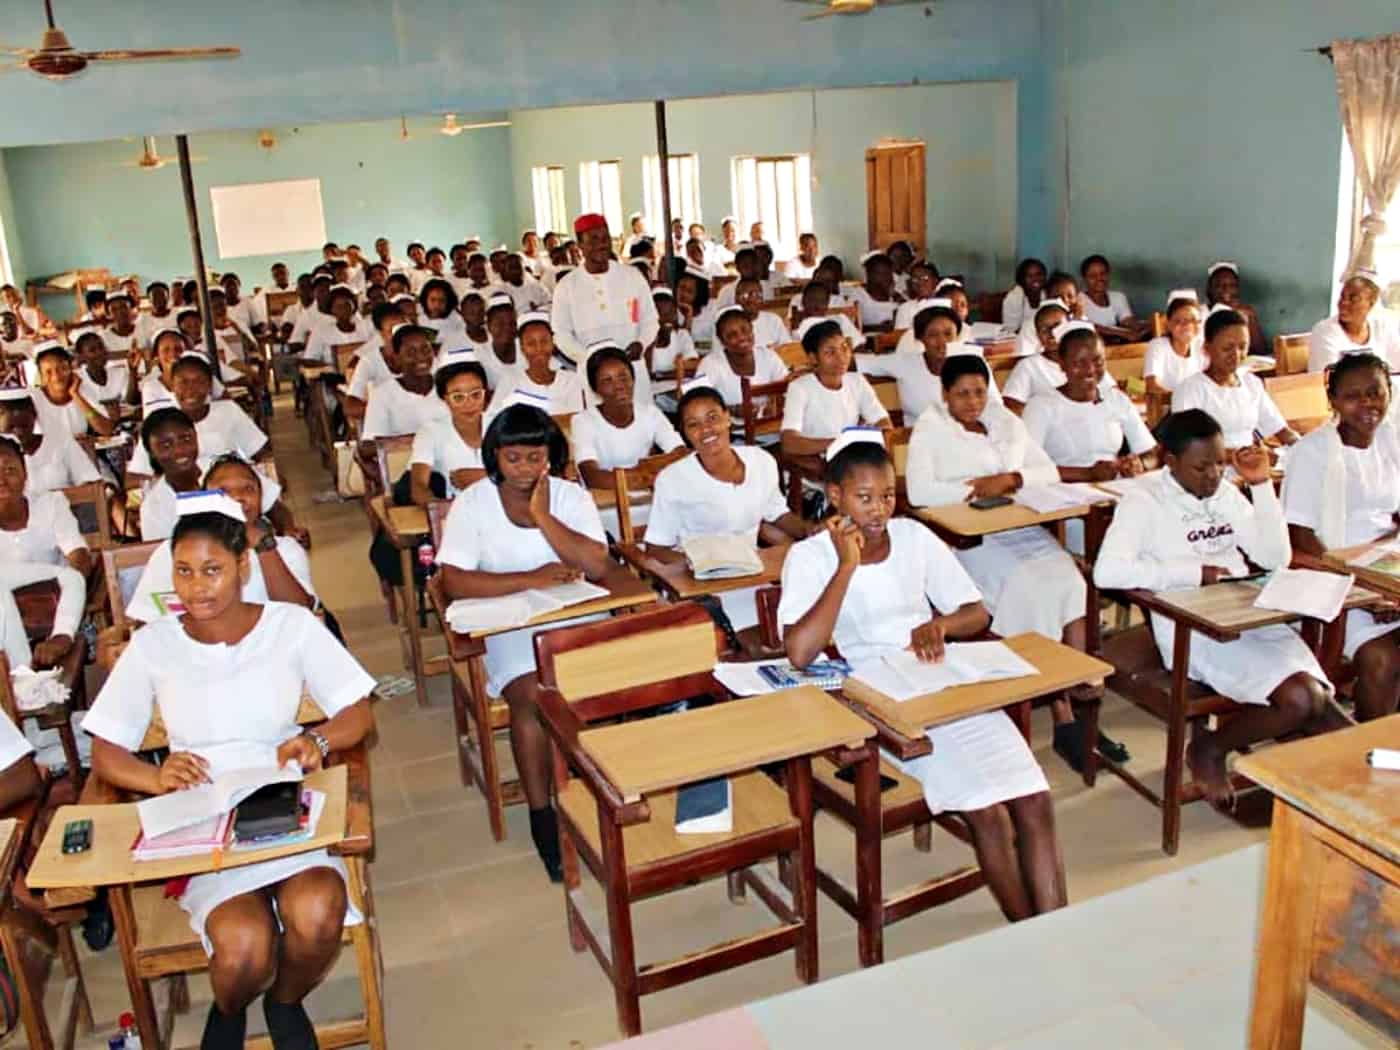 Rivers State Schools of Nursing and Midwifery Admission List